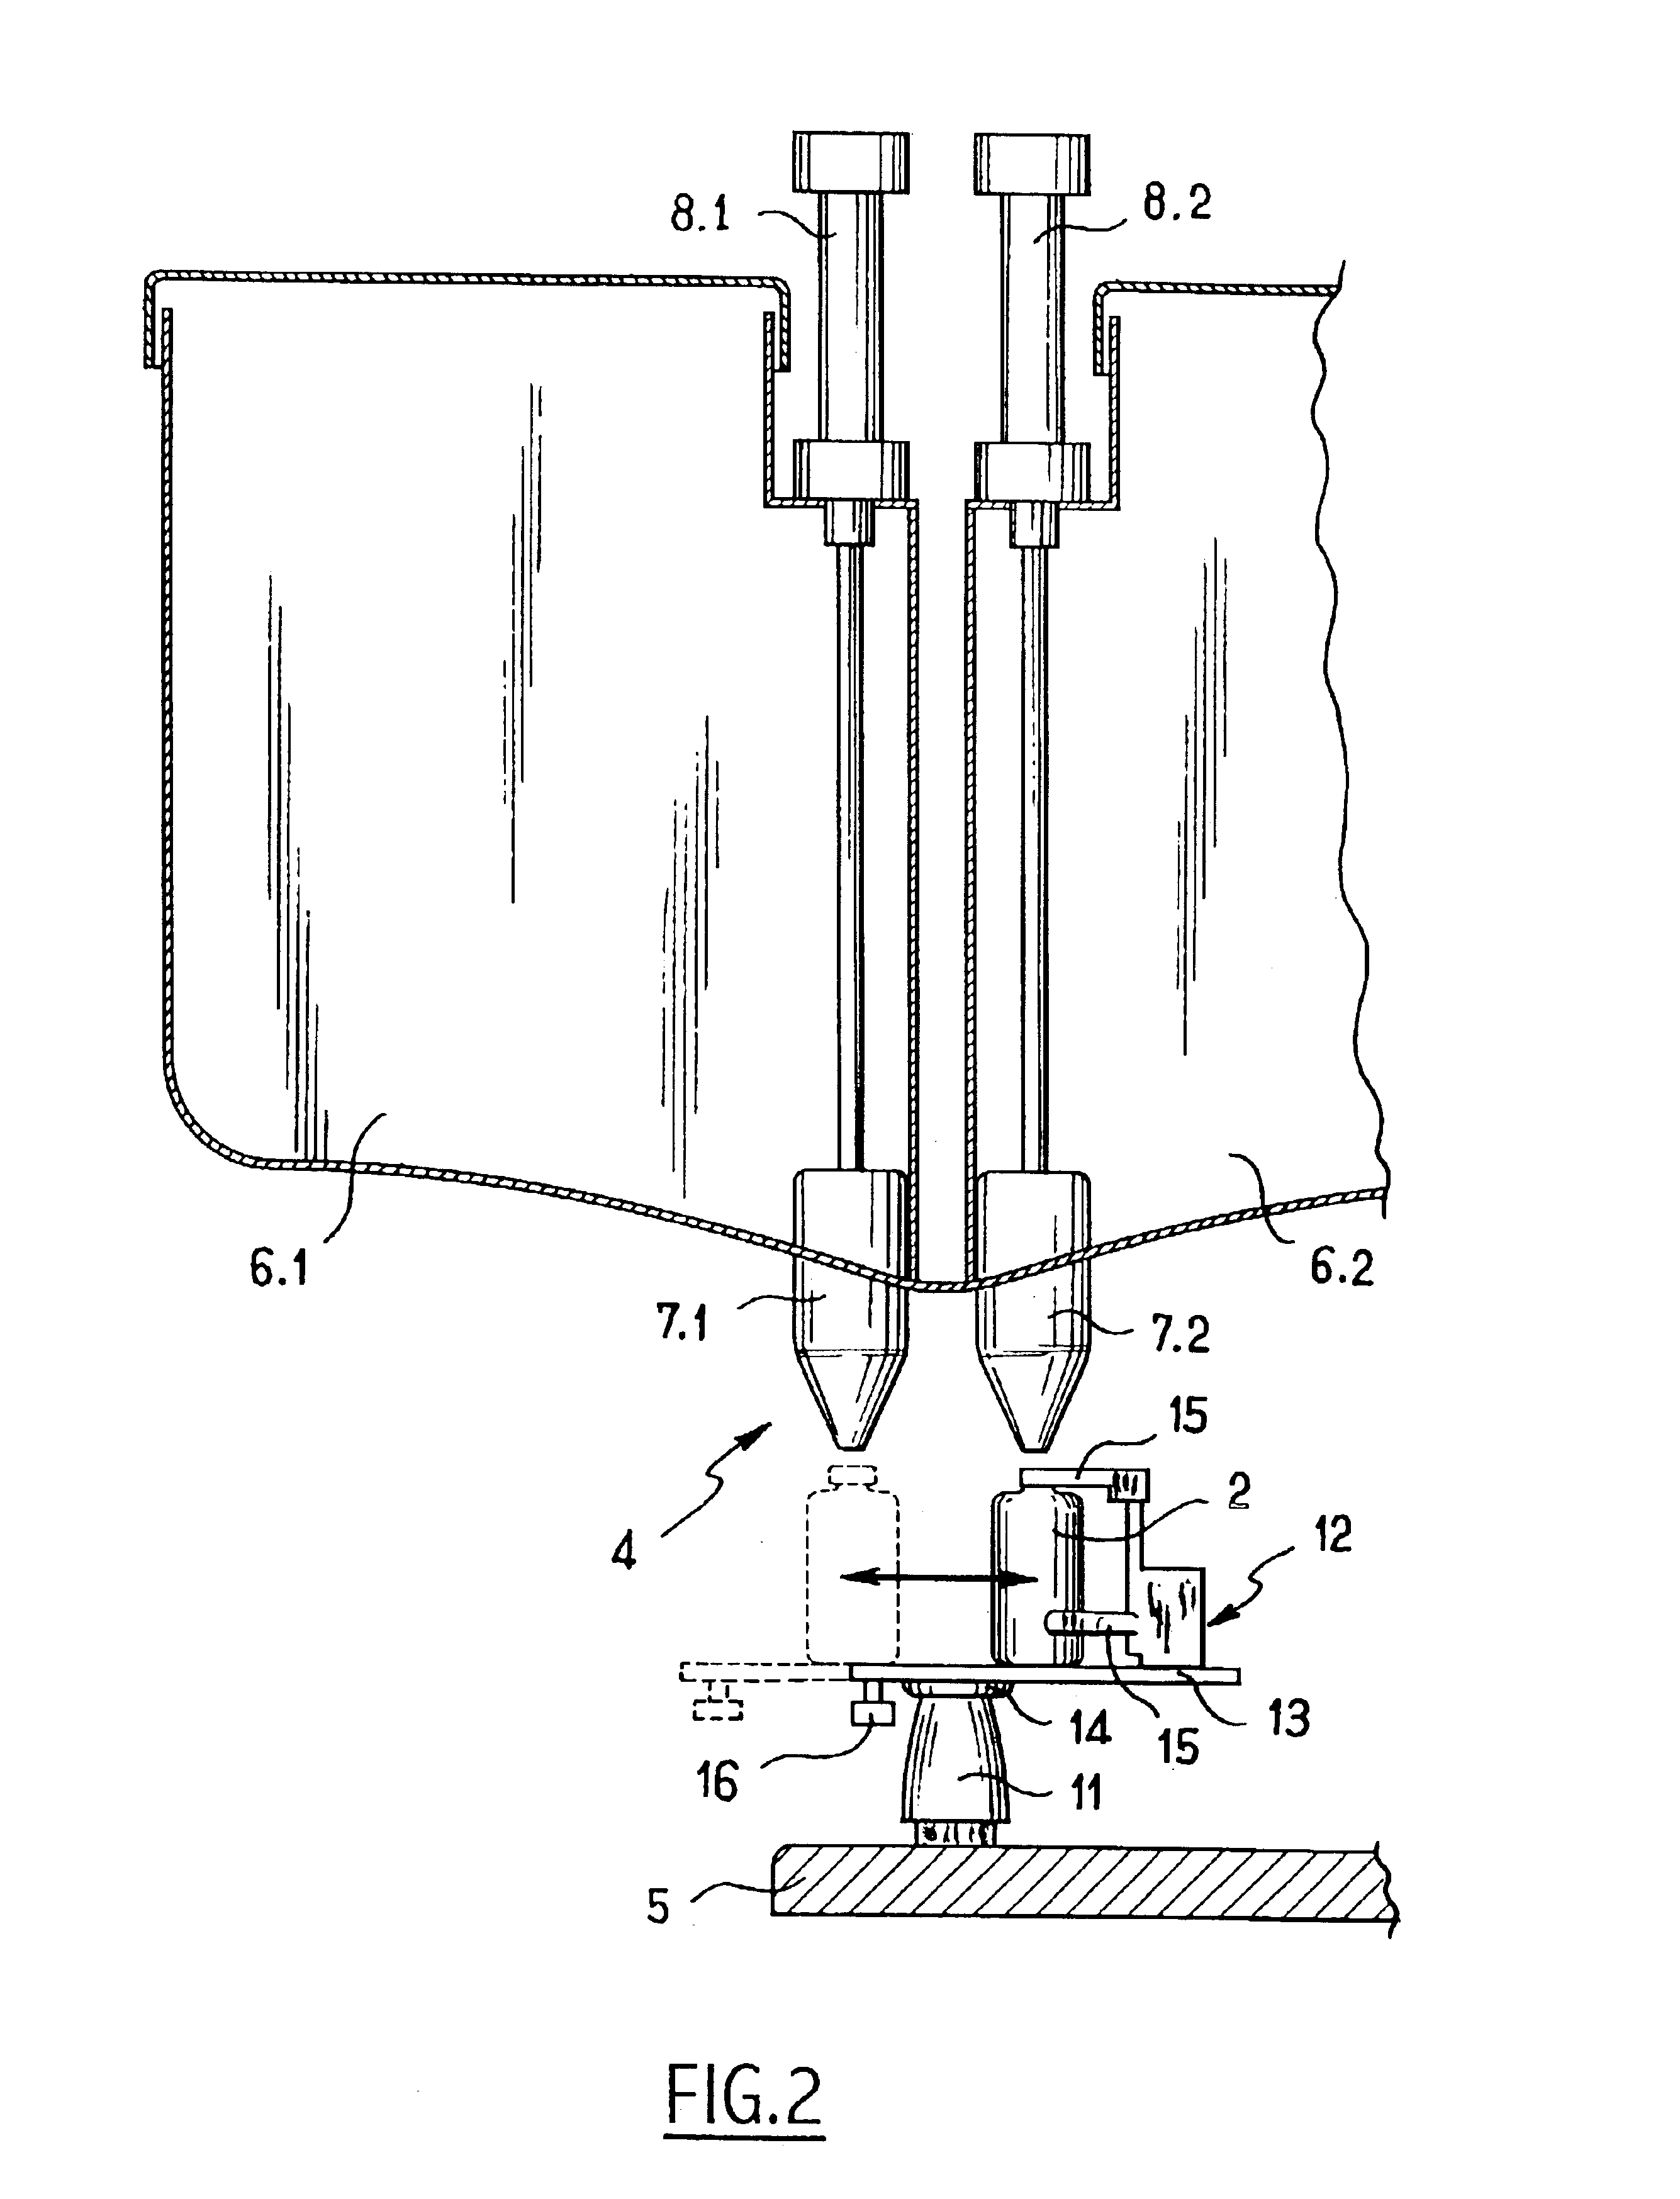 Installation for filling receptacles with varying product compositions